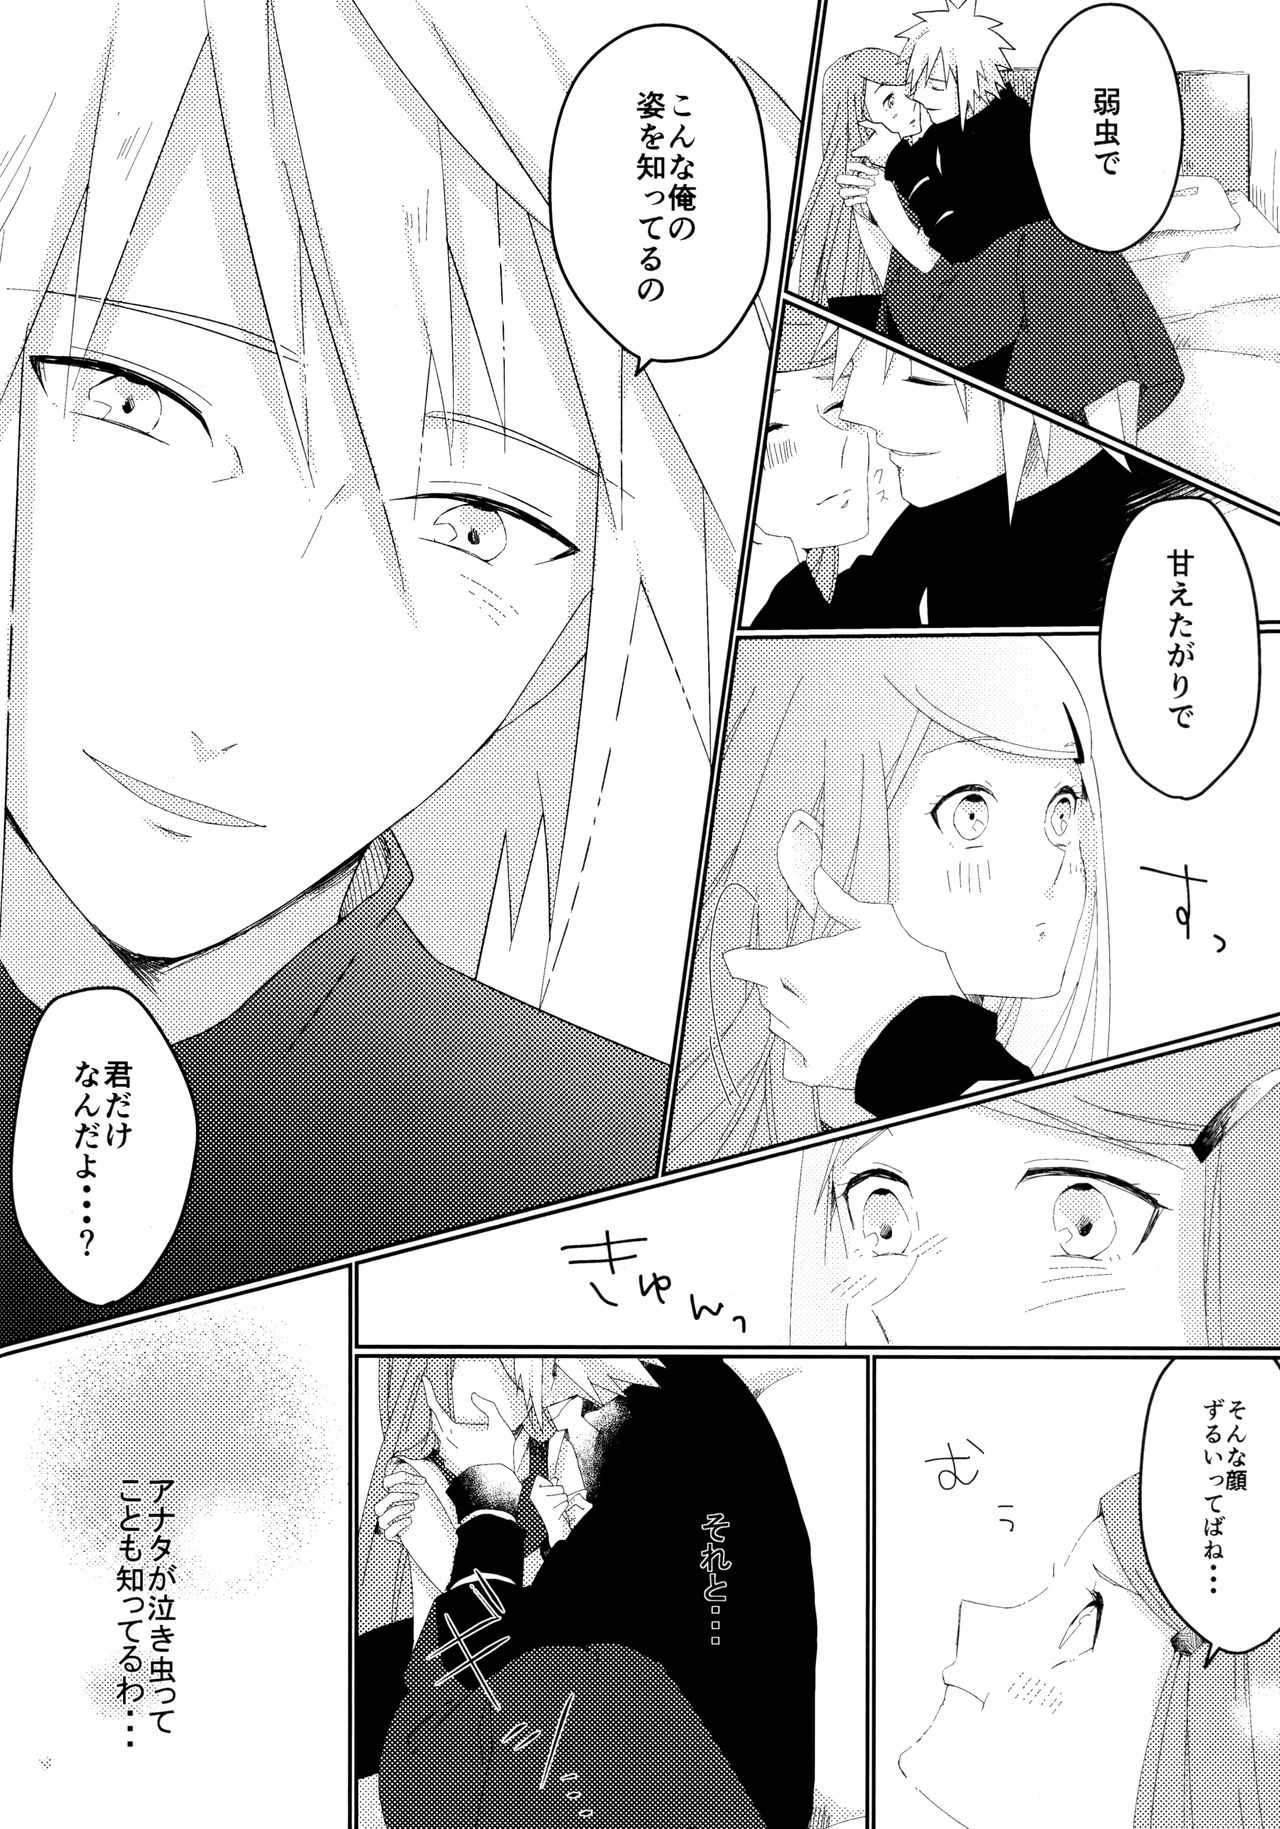 (Zennin Shuuketsu 6) [Fragrant Olive (SIN)] Only You Know (Naruto) page 9 full